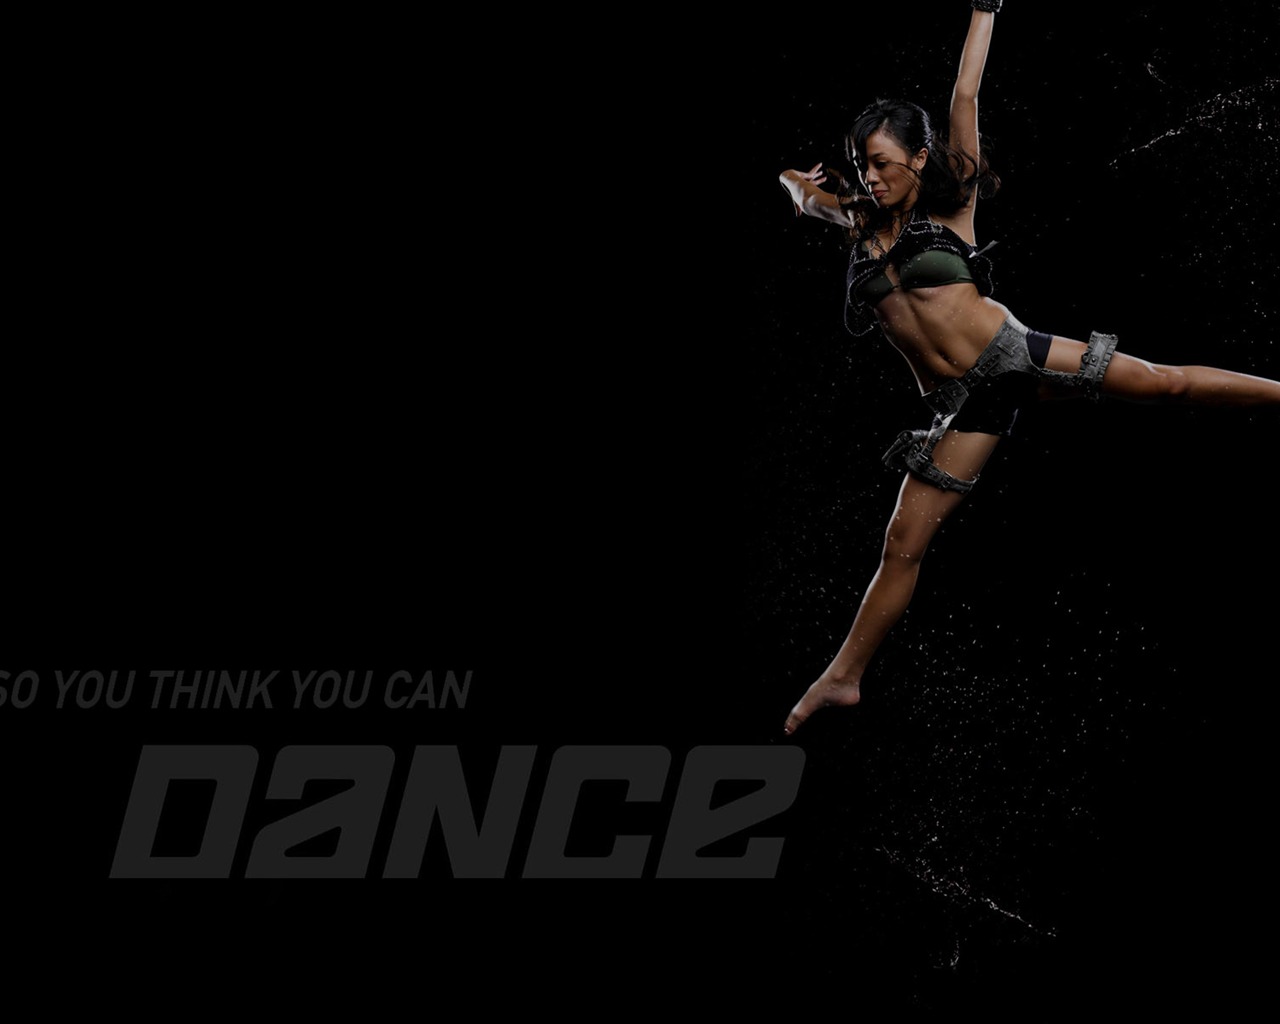 So You Think You Can Dance 舞林争霸 壁纸(二)3 - 1280x1024